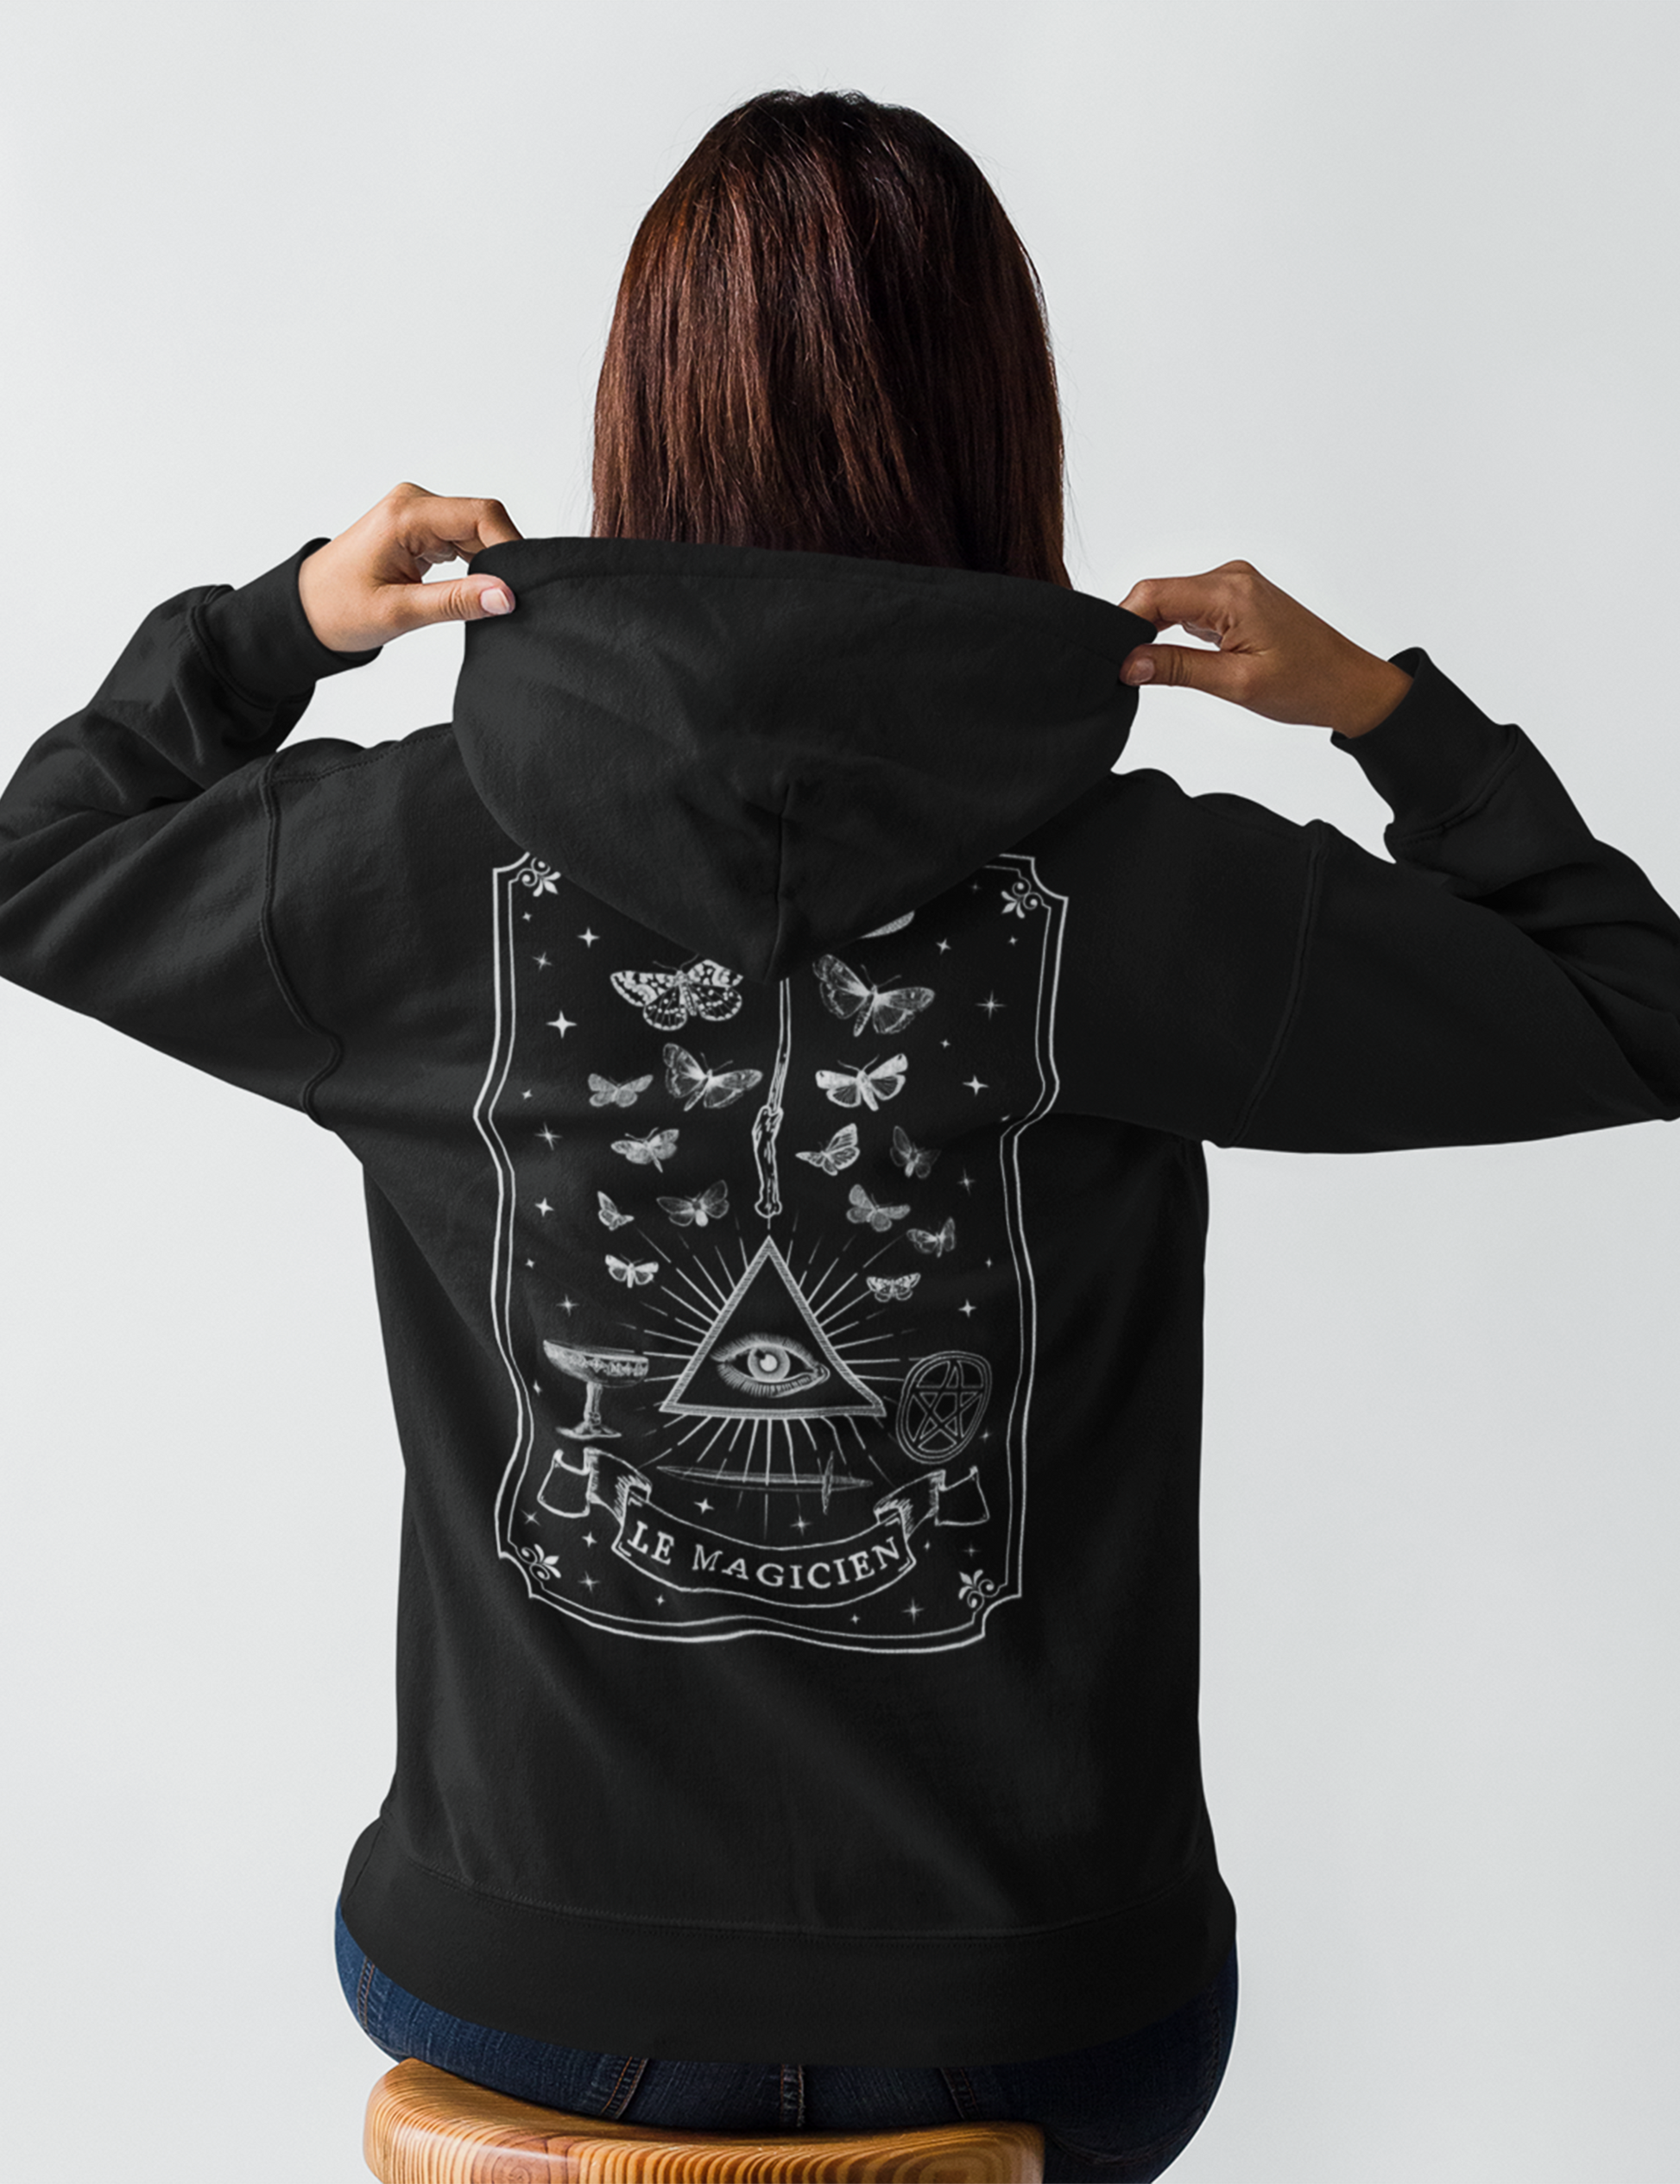 The Magician Tarot Card Plus Size Witchy Aesthetic Clothing Hoodie